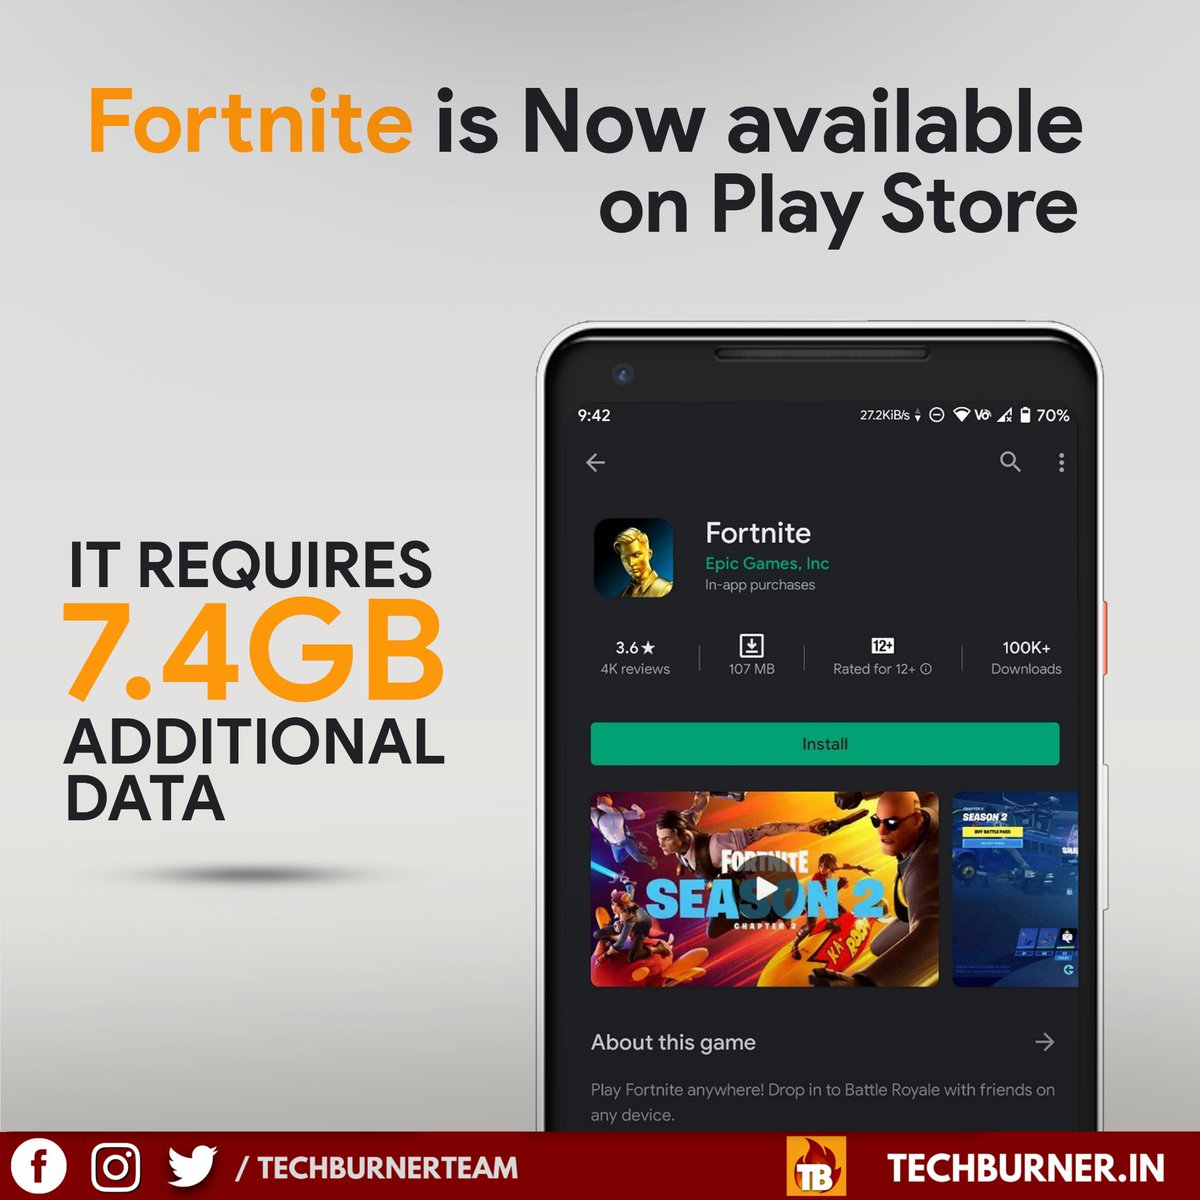 Burnerbits On Twitter After Over 18 Months Epic Games Has Finally Released Fortnite On The Google Play Store For Android Users Fortnite Fortnitegame Fortnitemobile Fortniteplaystore Https T Co Dmjnqcikte